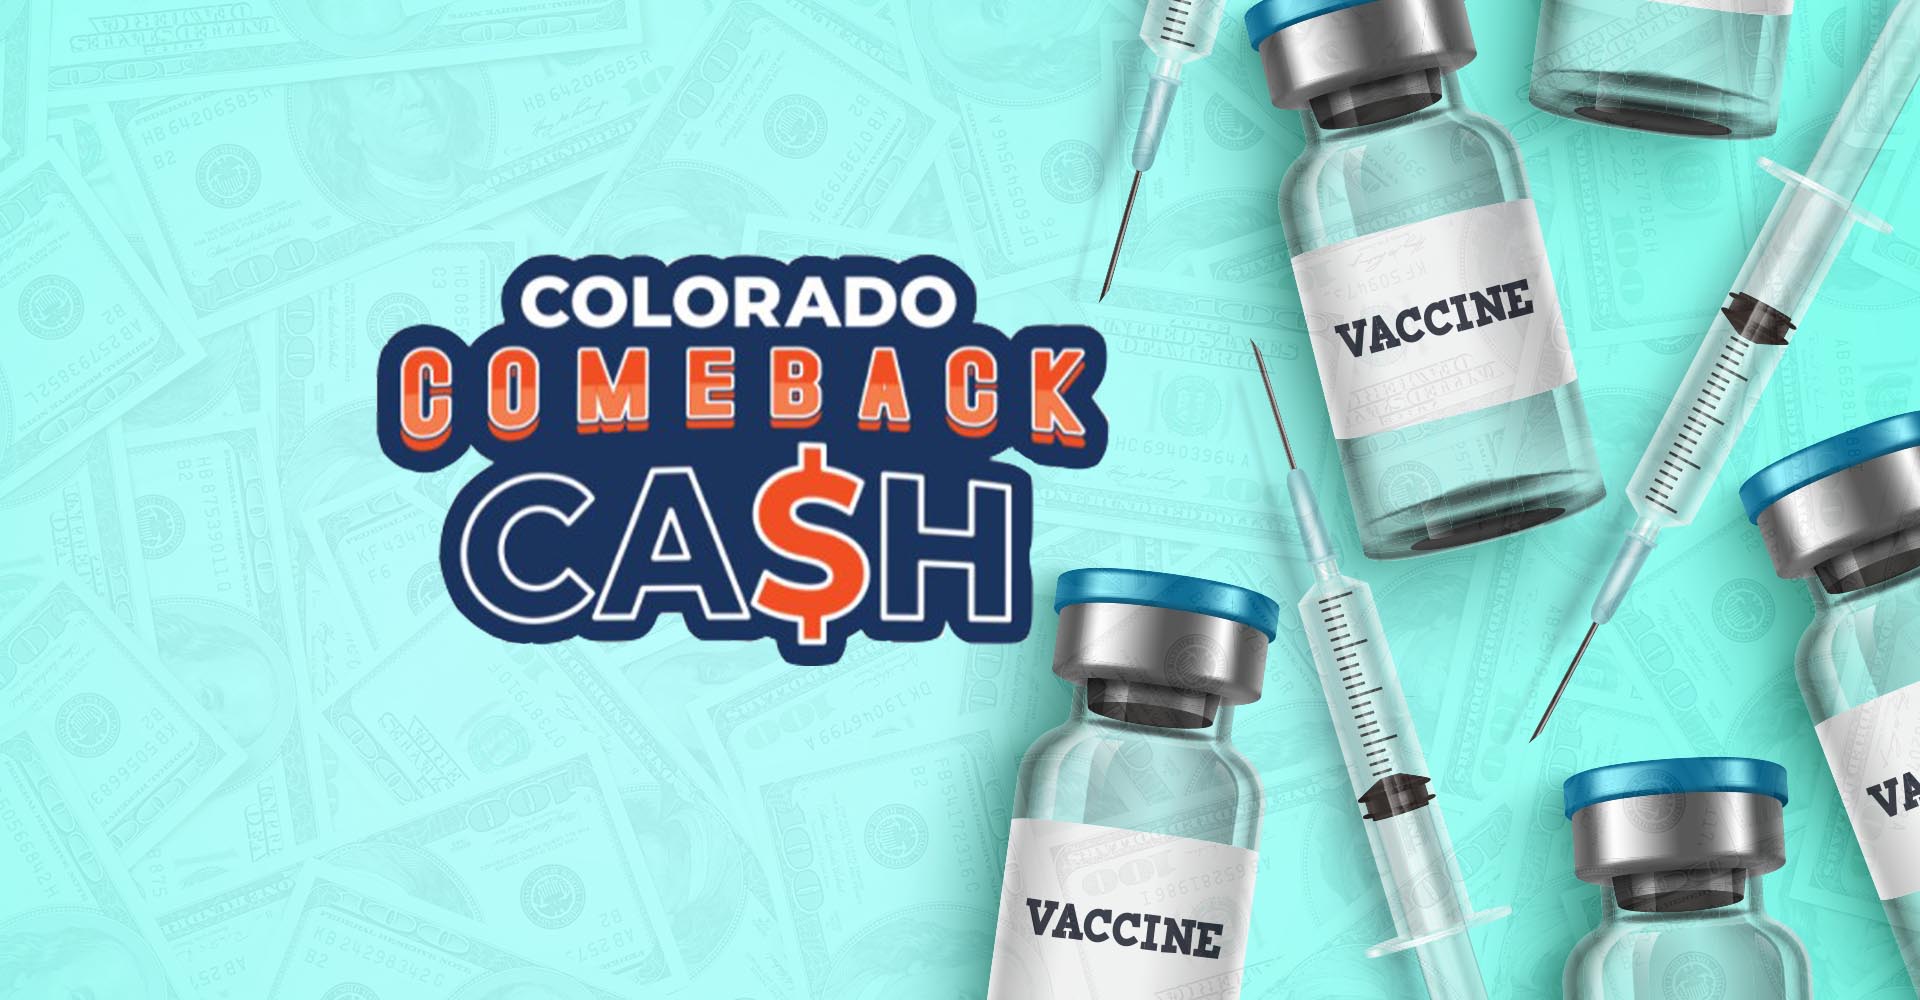 Here are the odds of winning $1 million in Colorado’s Comeback Cash vaccine drawings